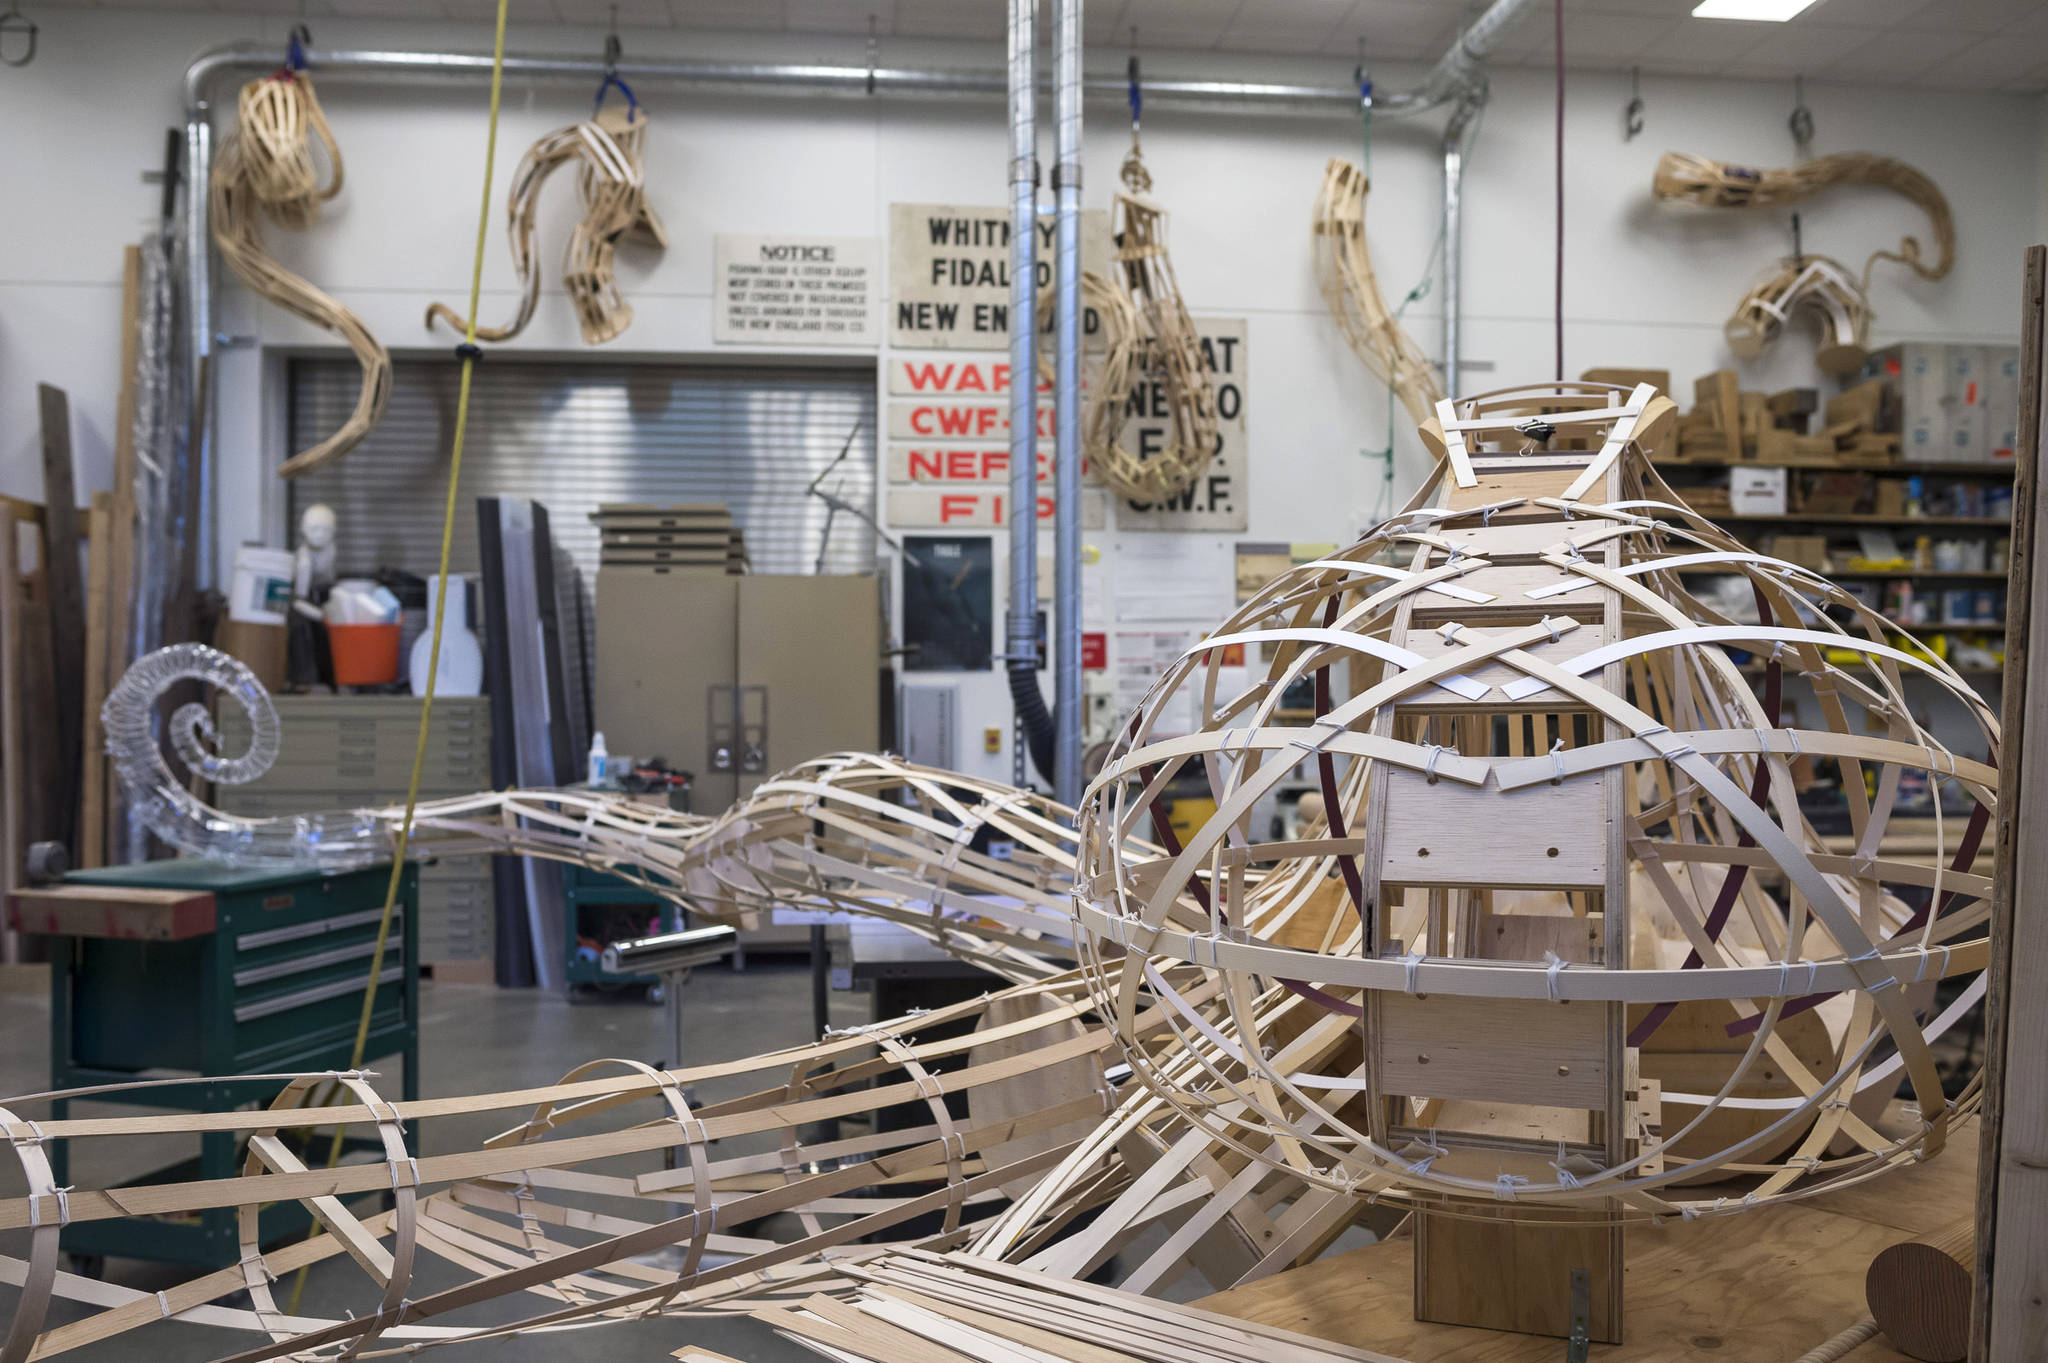 The frame of a giant octopus and its eight legs decorate a carpenter’s shop at the Alaska State Libraries, Archives and Museums on Monday, Sept. 17, 2018. Exhibit Specialist Aaron Elmore is building the creature for the Museum’s children’s room. (Michael Penn | Capital City Weekly)